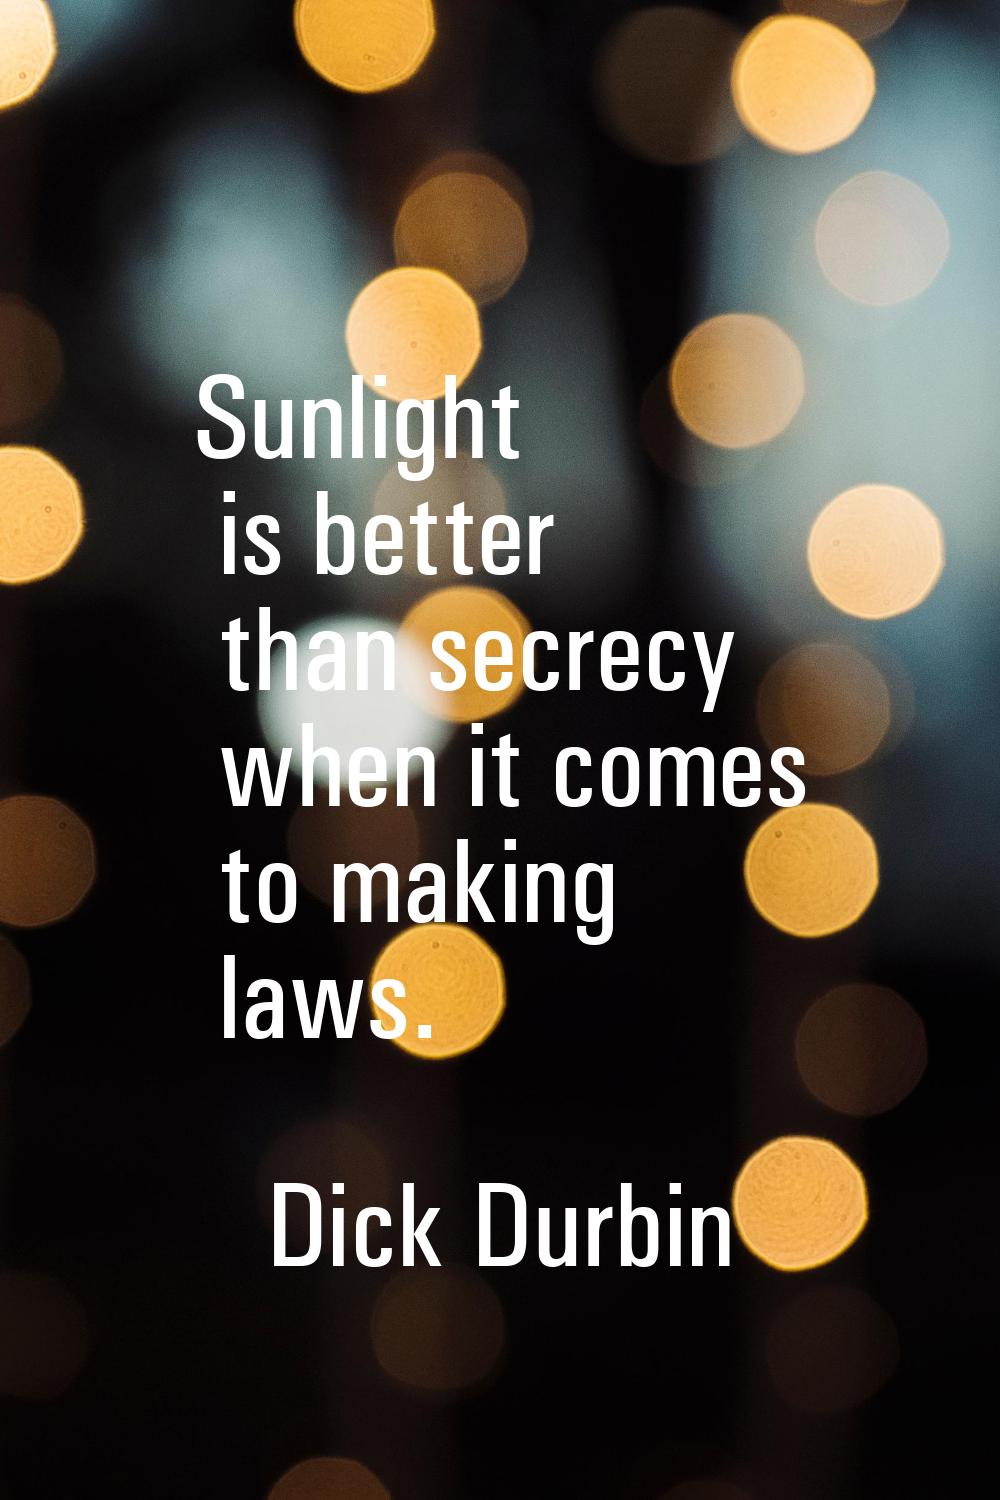 Sunlight is better than secrecy when it comes to making laws.